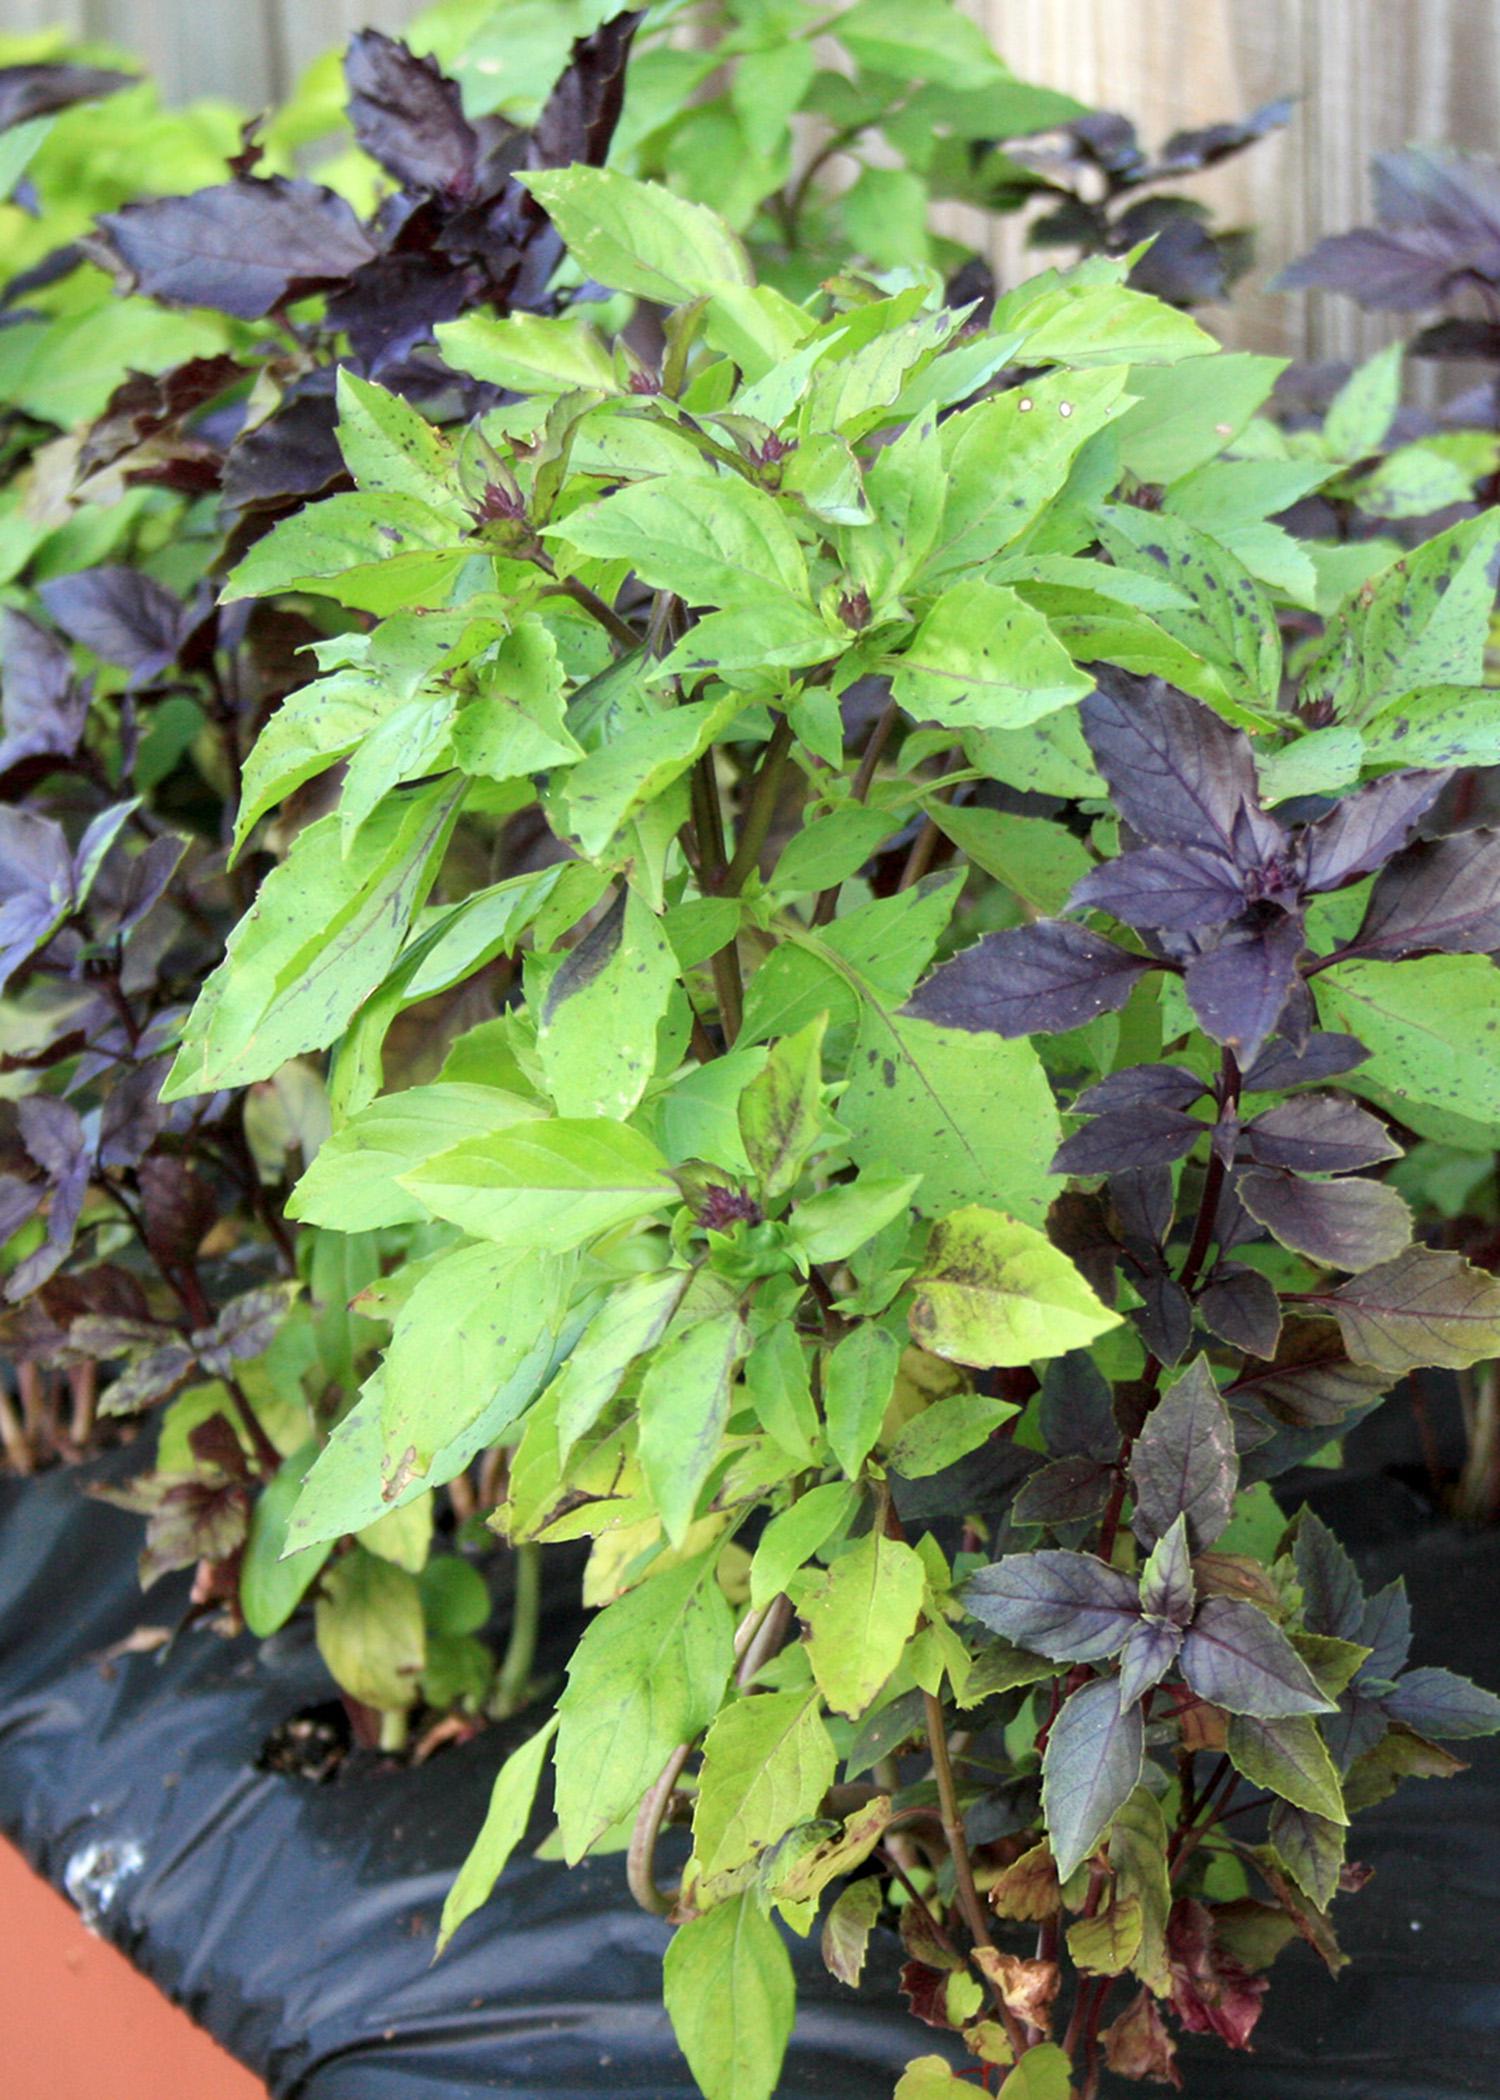 Grow herbs such as these colorful Dark Opal and Purple Osmin basil plants in a container so you can have fresh seasonings and decorations for dishes all winter long. (Photo by MSU Extension Service/Gary Bachman)